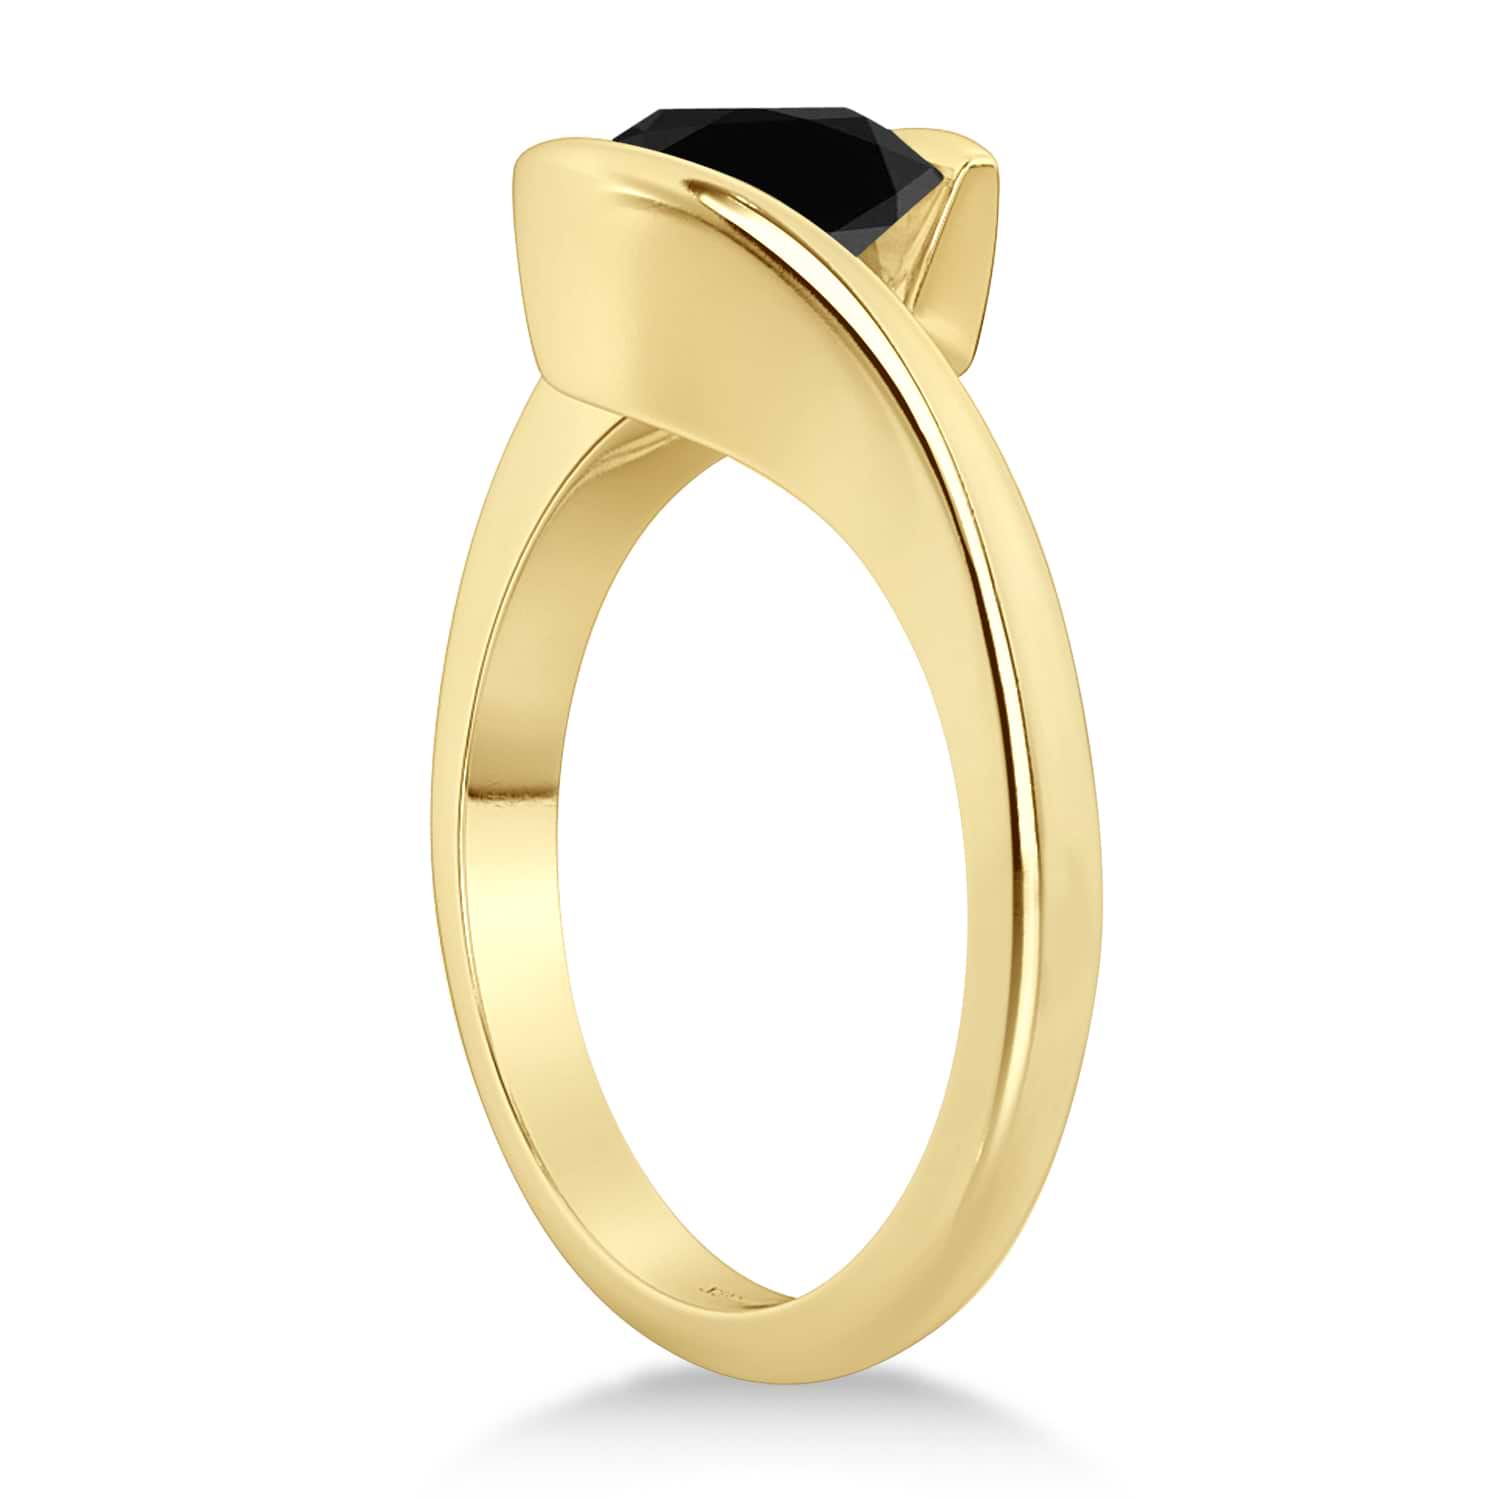 Tension Set Solitaire Black Diamond Engagement Ring 14k Yellow Gold 0.50ct